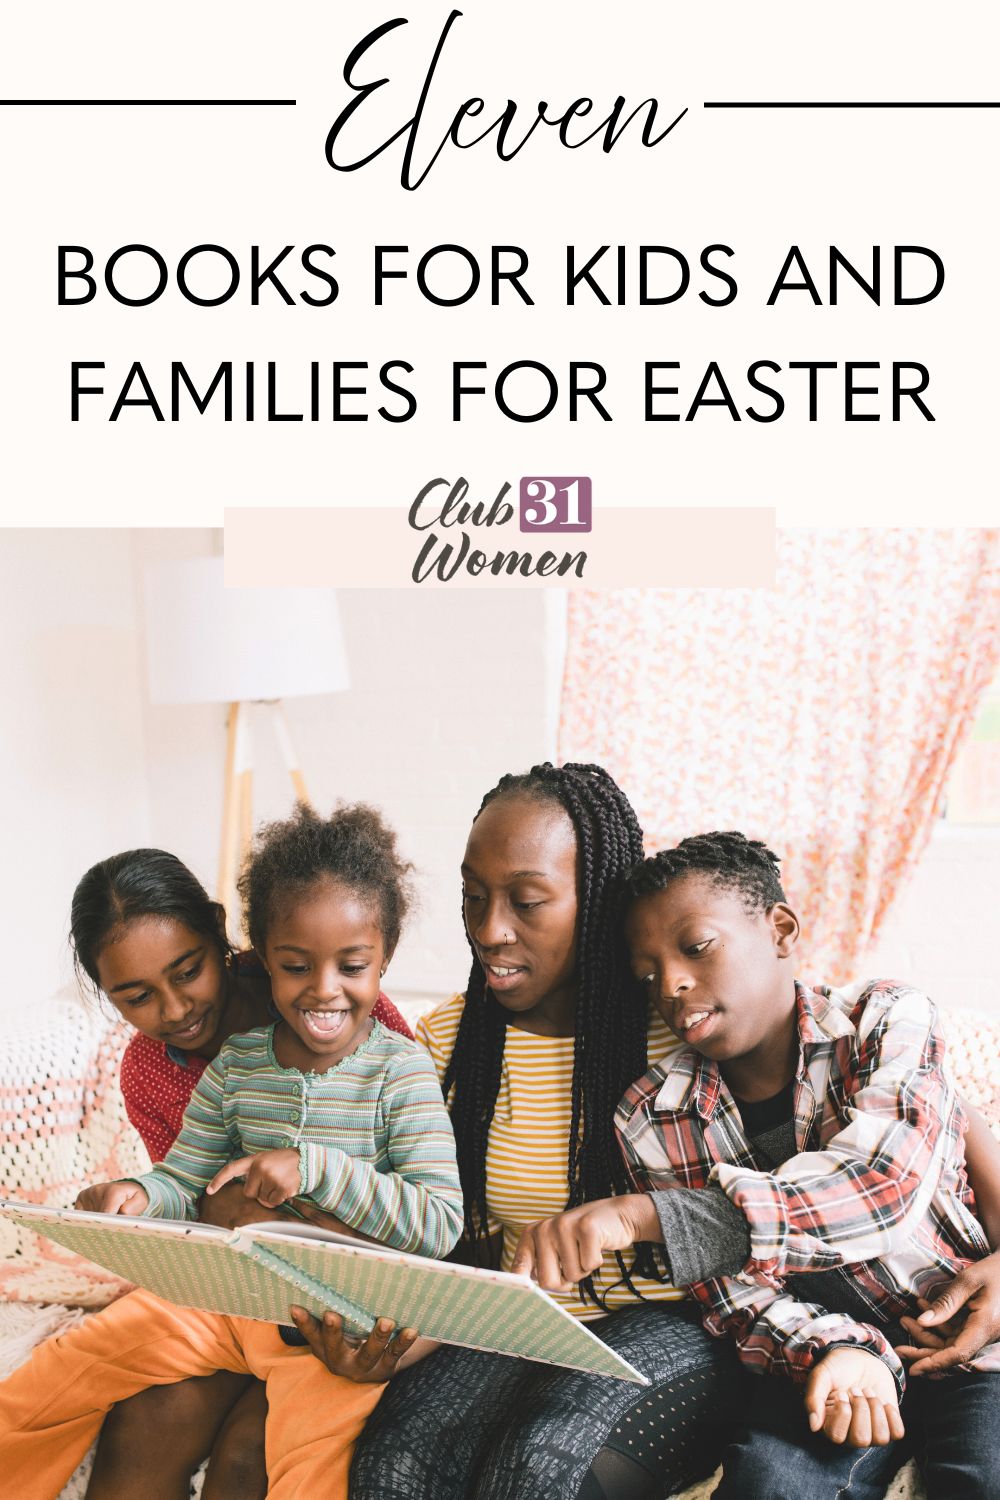 11 Books for Kids and Families for Easter via @Club31Women